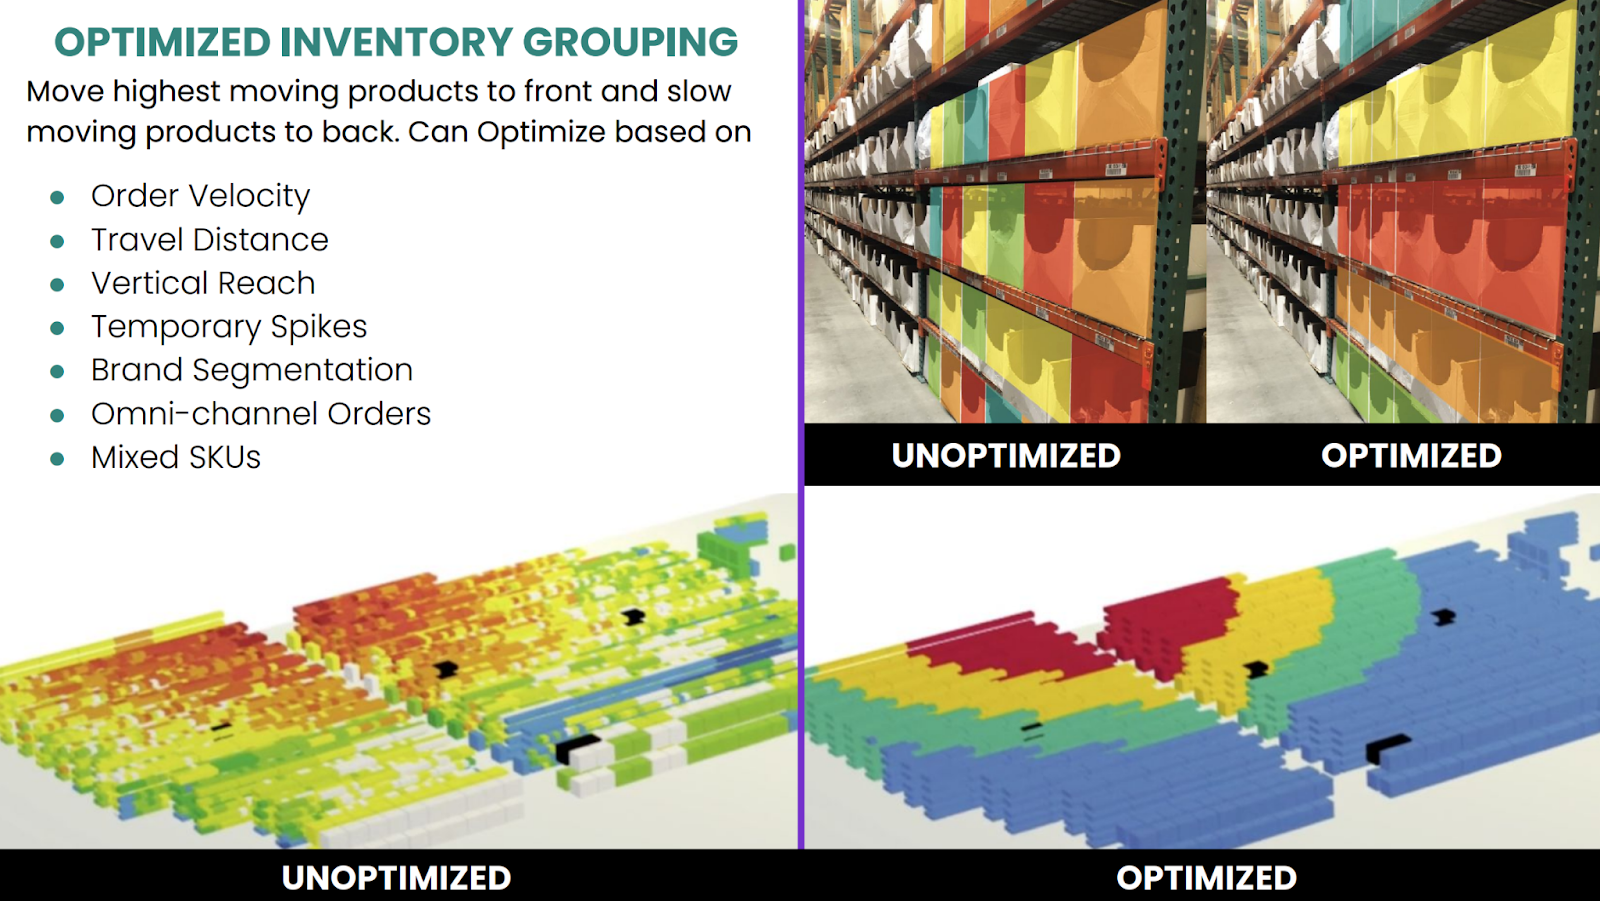  Optimized Inventory Grouping, VERSES Investor Presentation